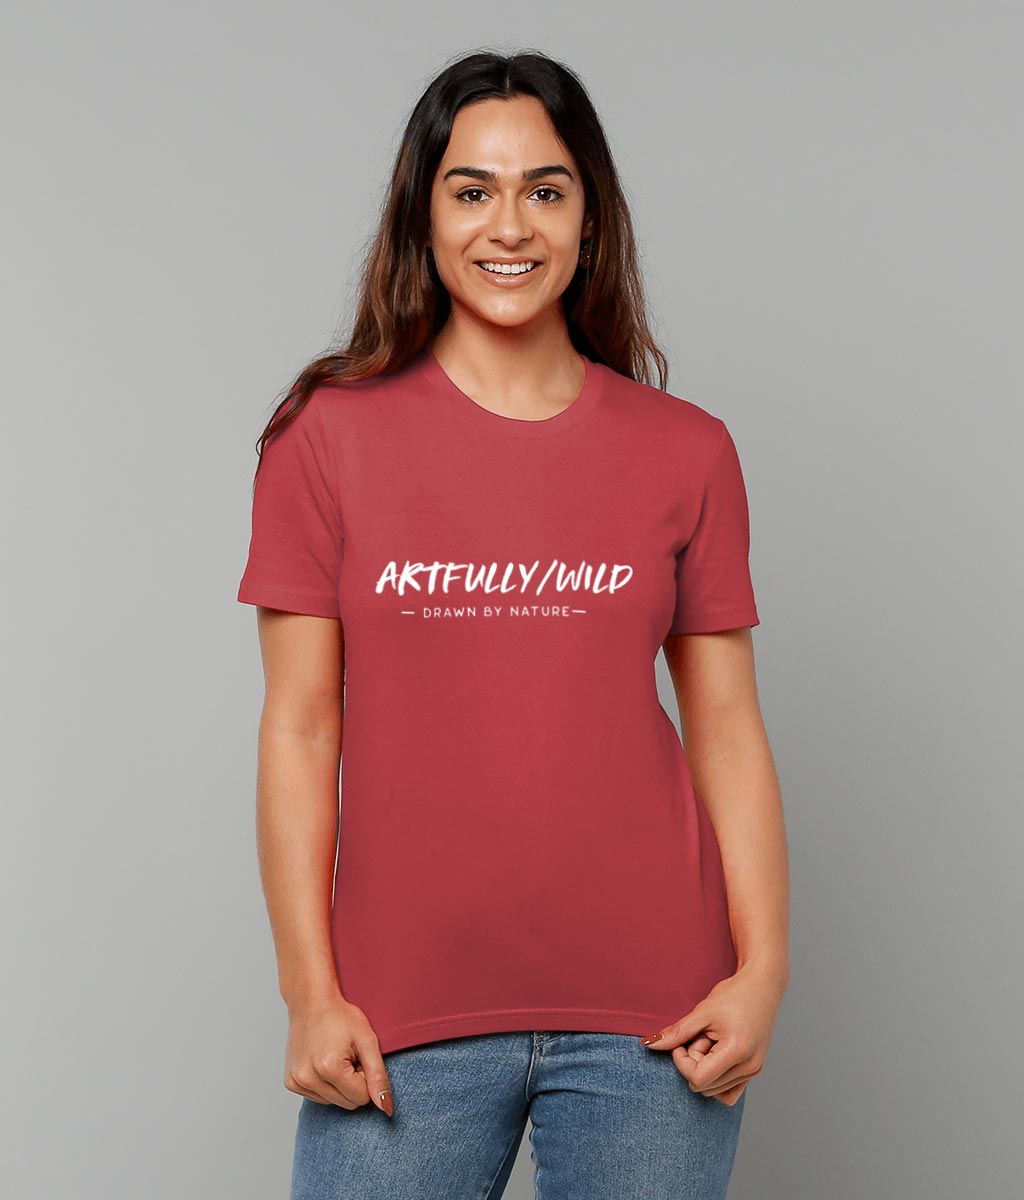 Female model wearing 'ARTFULLY WILD. DRAWN BY NATURE' Organic Cotton Red T-Shirt. Unisex/Men/Women. Printed with eco-friendly water-based Inks. Sustainable Ethical Clothing by Artfully/Wild.